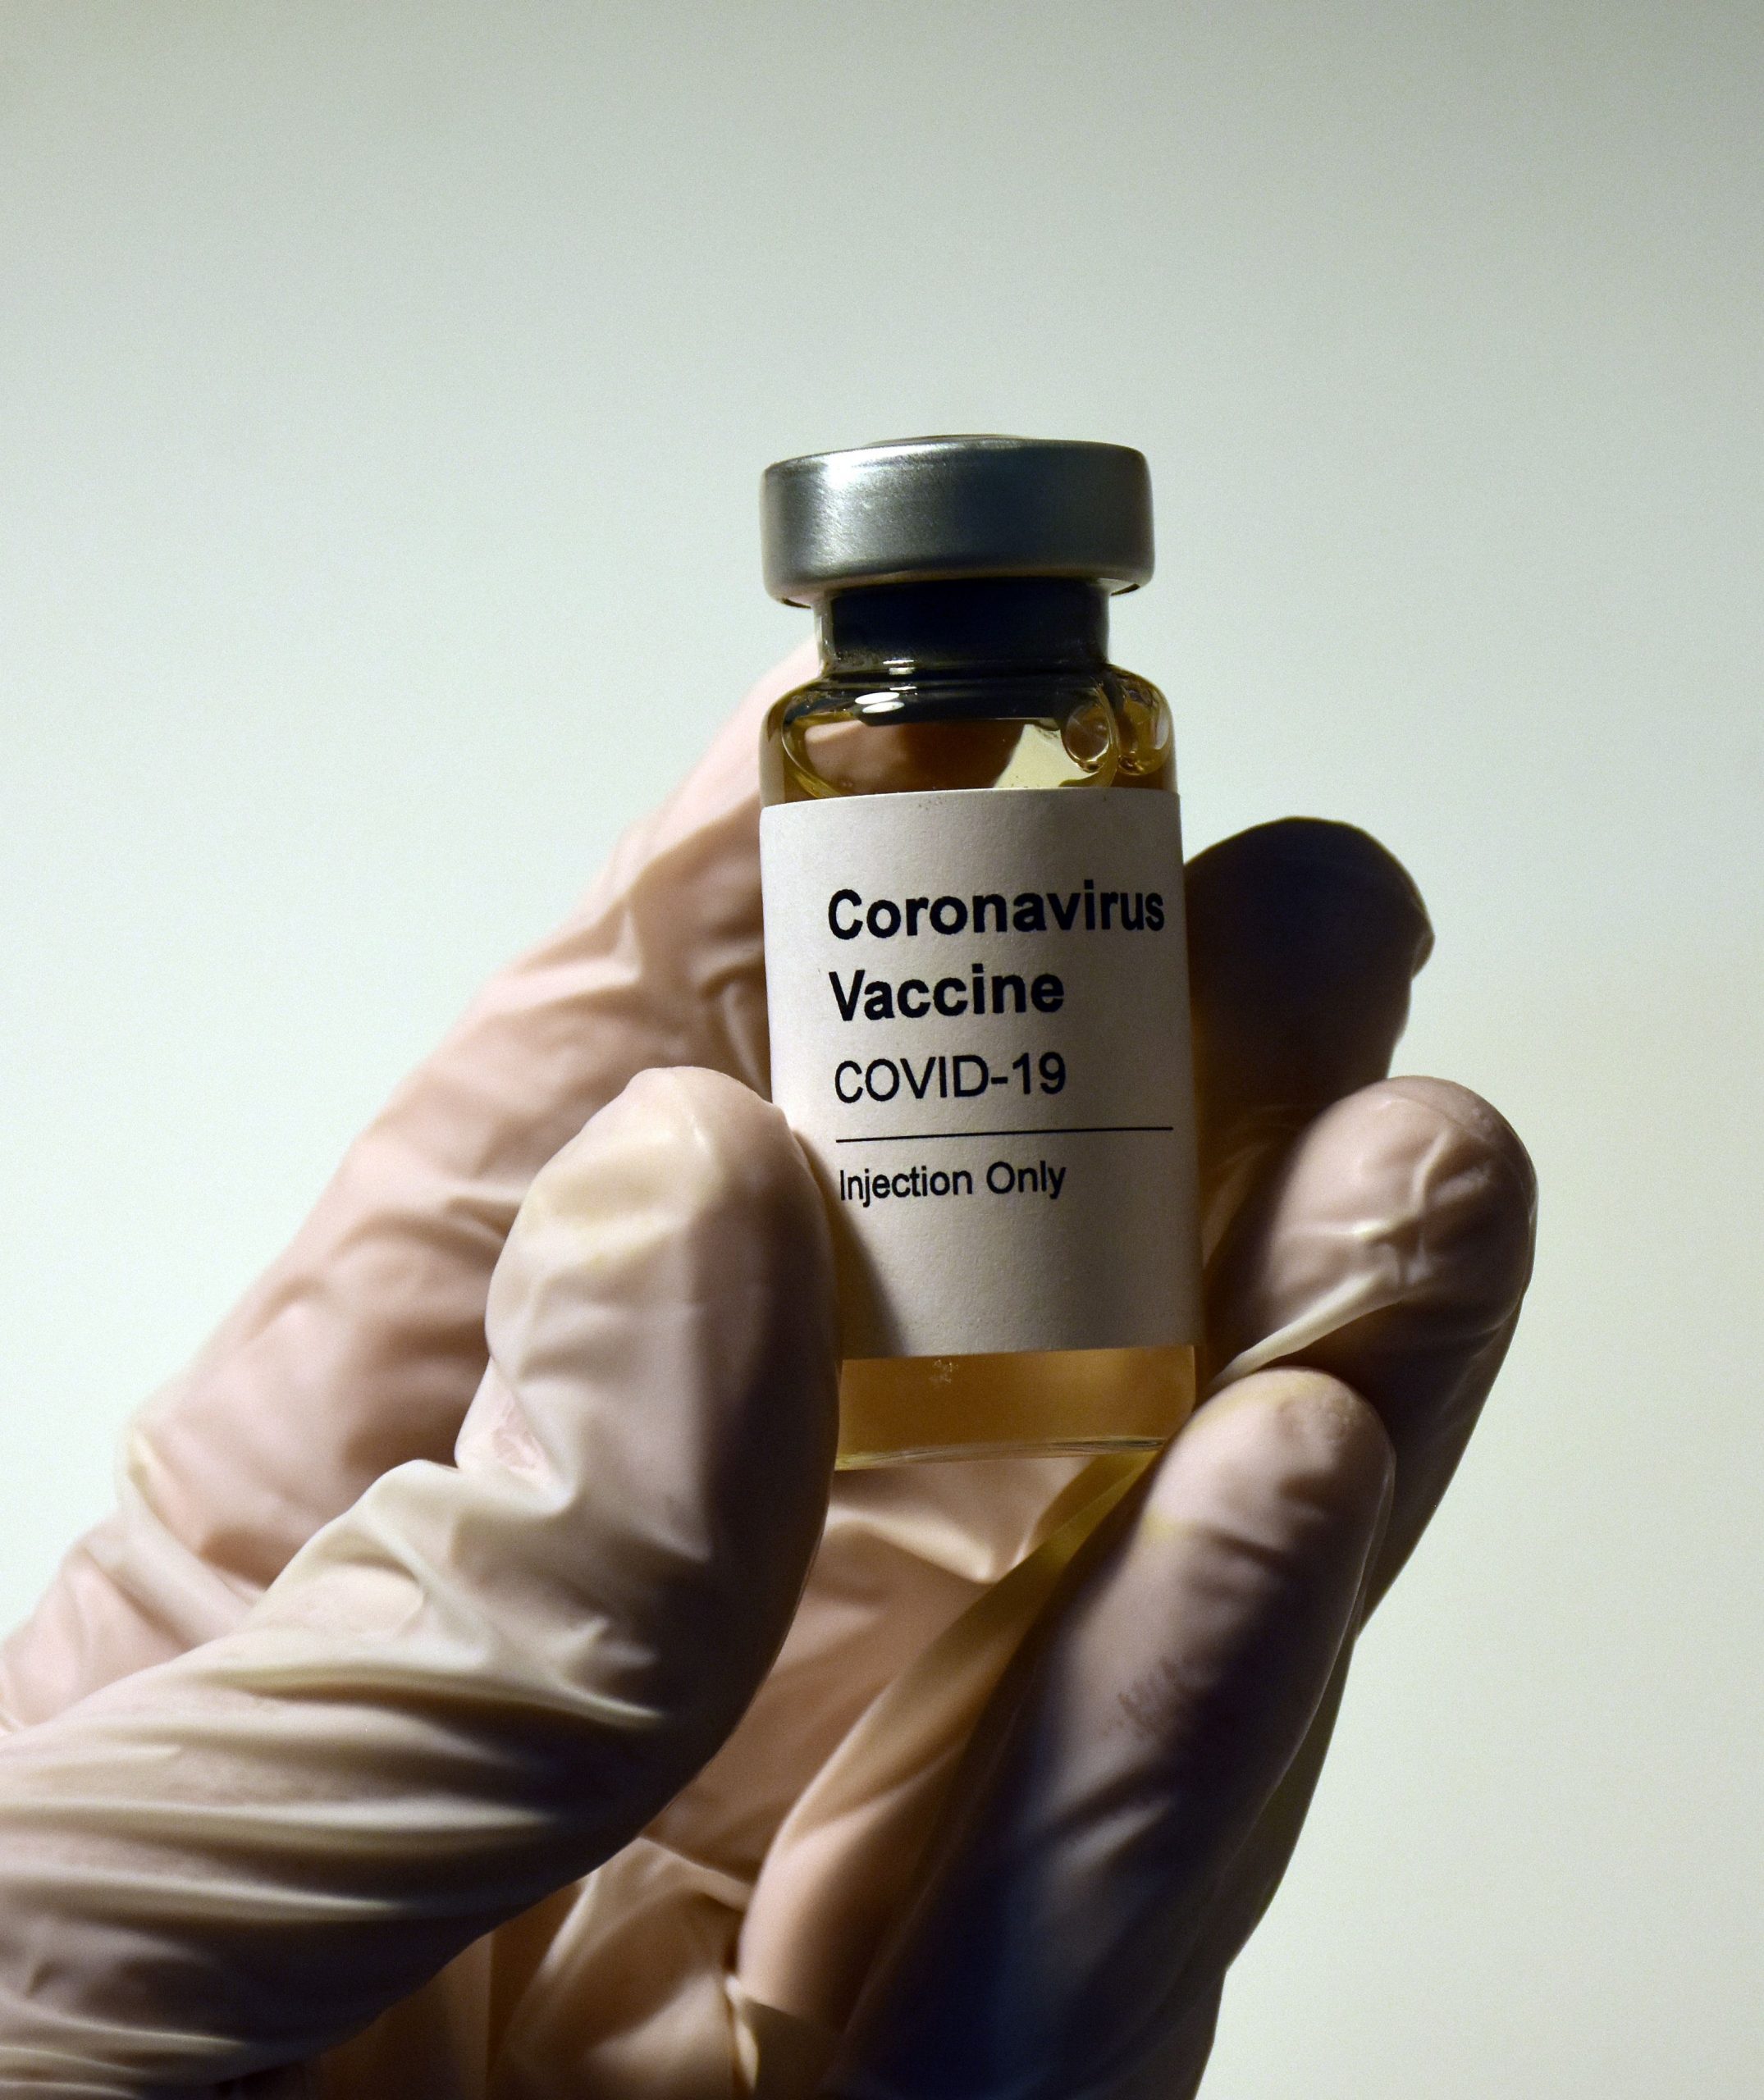 Here’s why some people get side effects after COVID vaccination